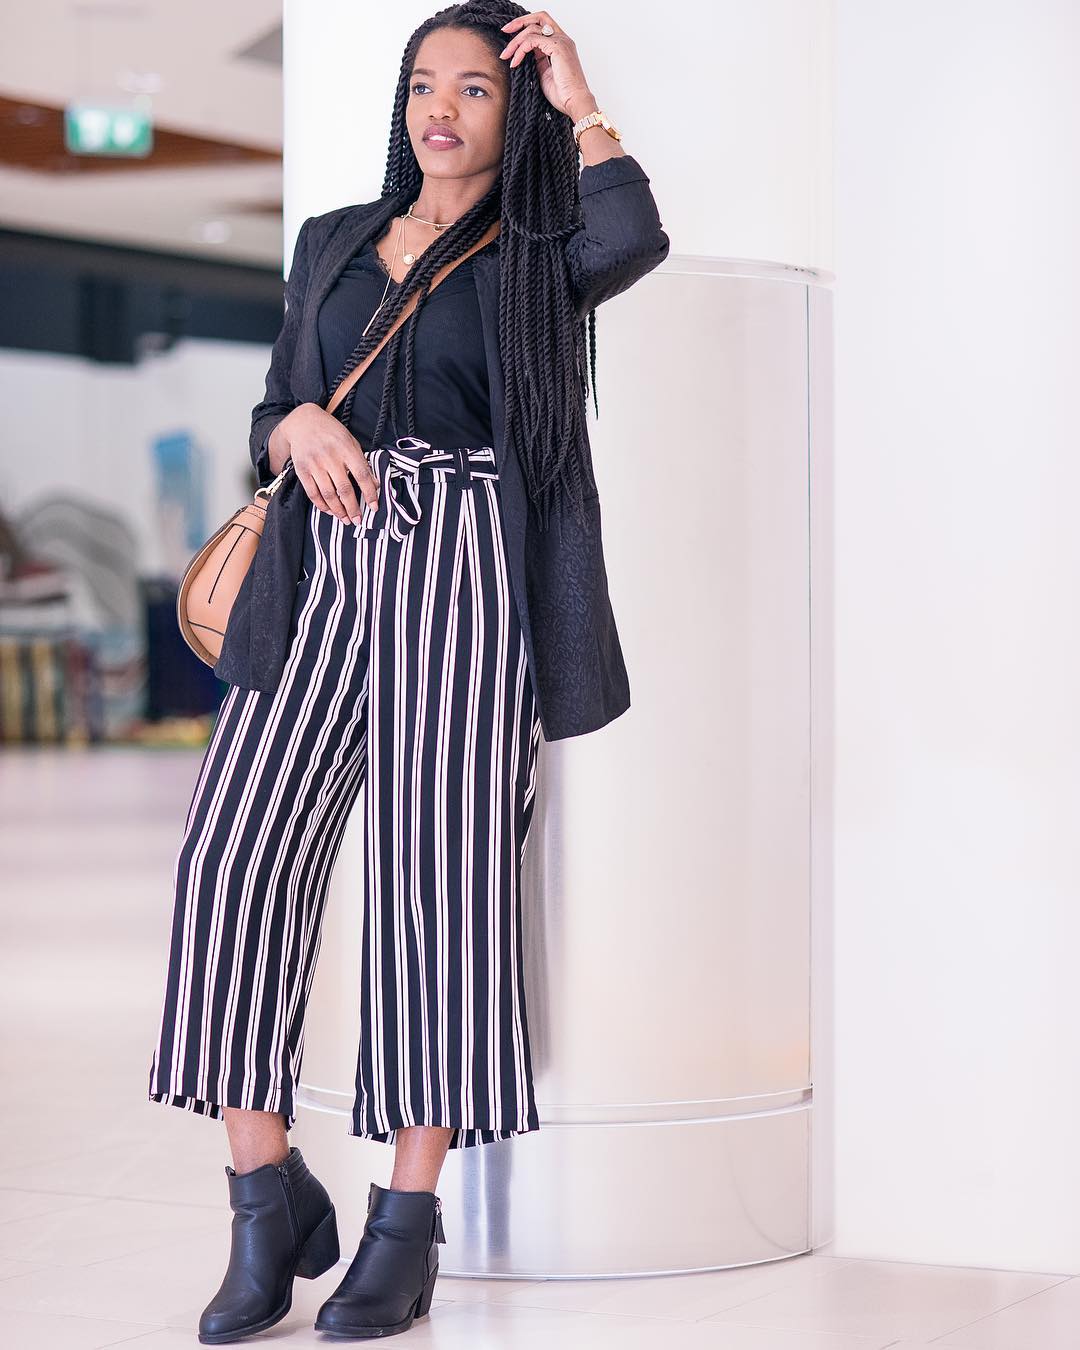 Ravishing Stripes Trouser With Black Top. Shrug And Leather Shoes